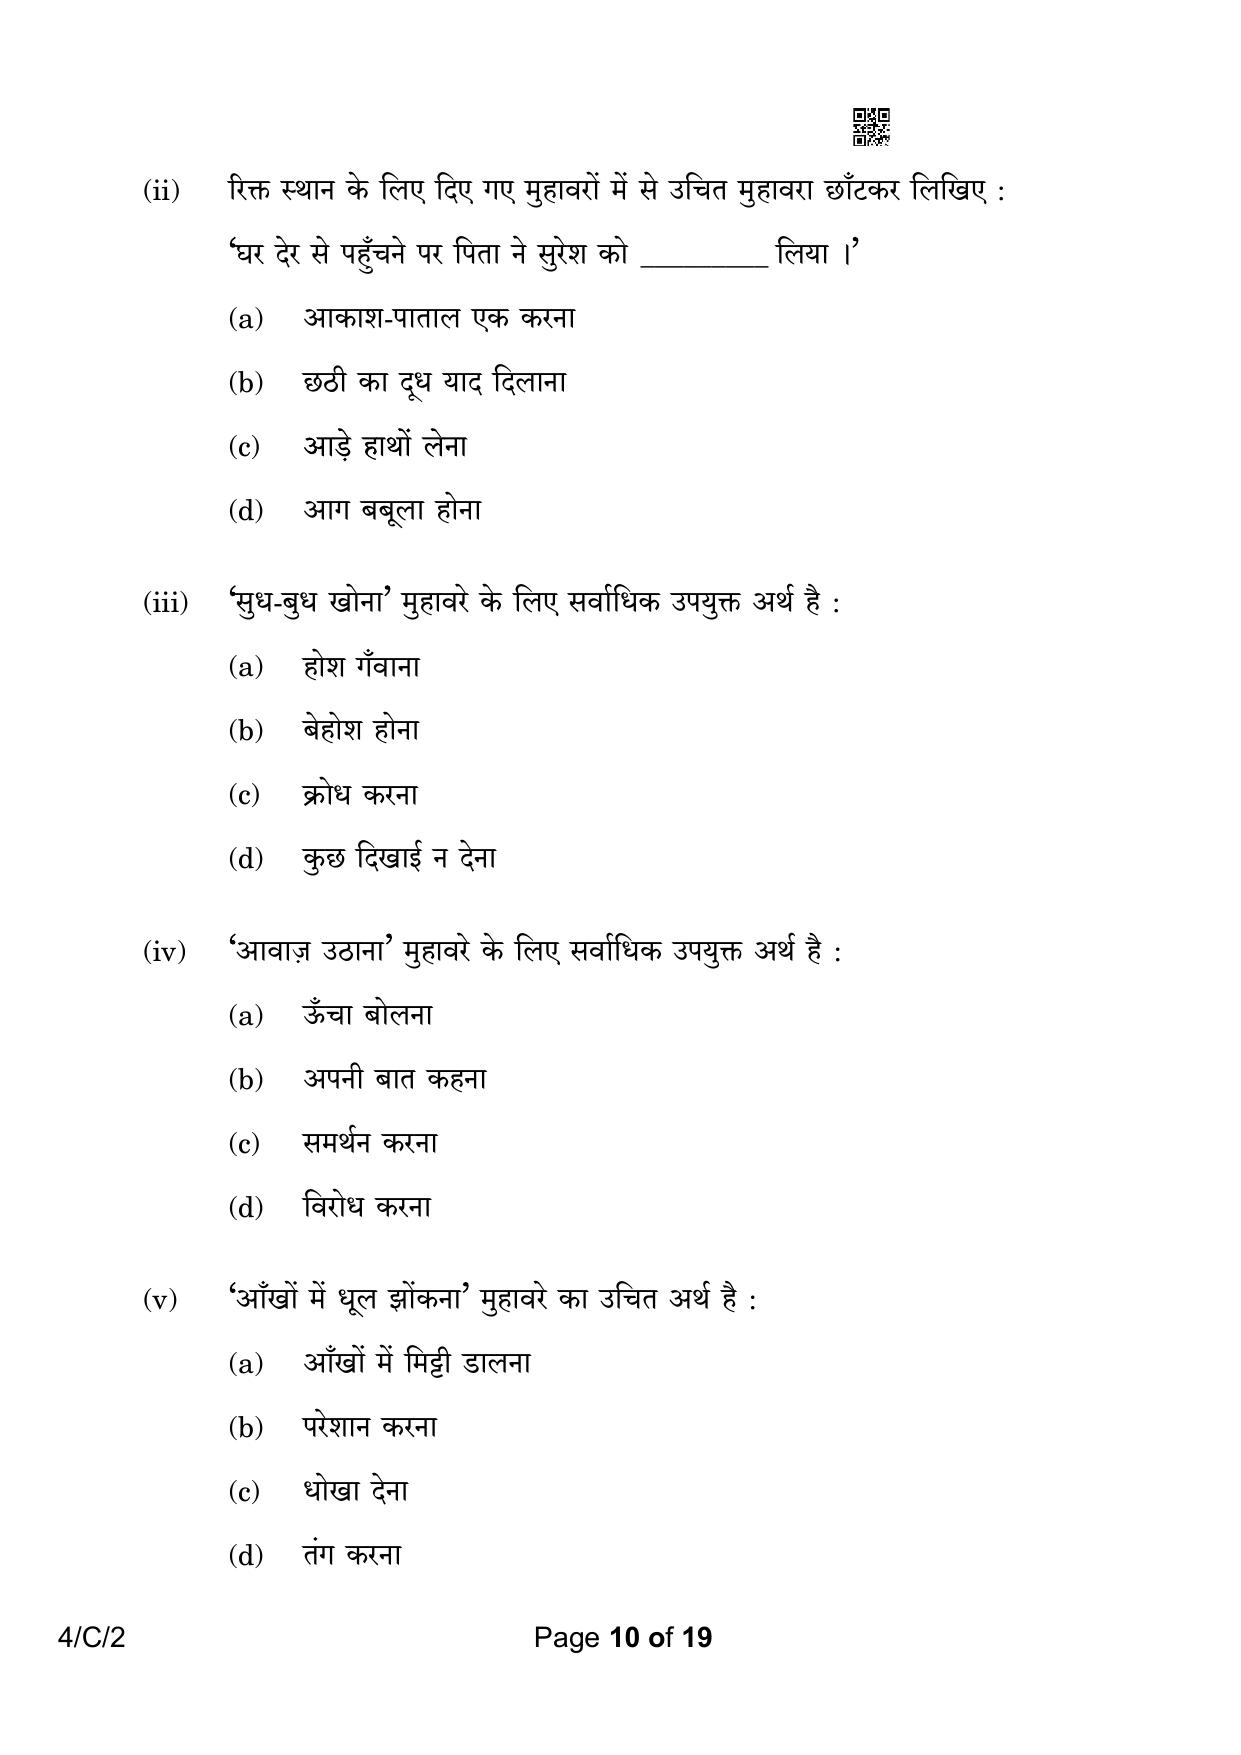 CBSE Class 10 4-2 Hindi B 2023 (Compartment) Question Paper - Page 10